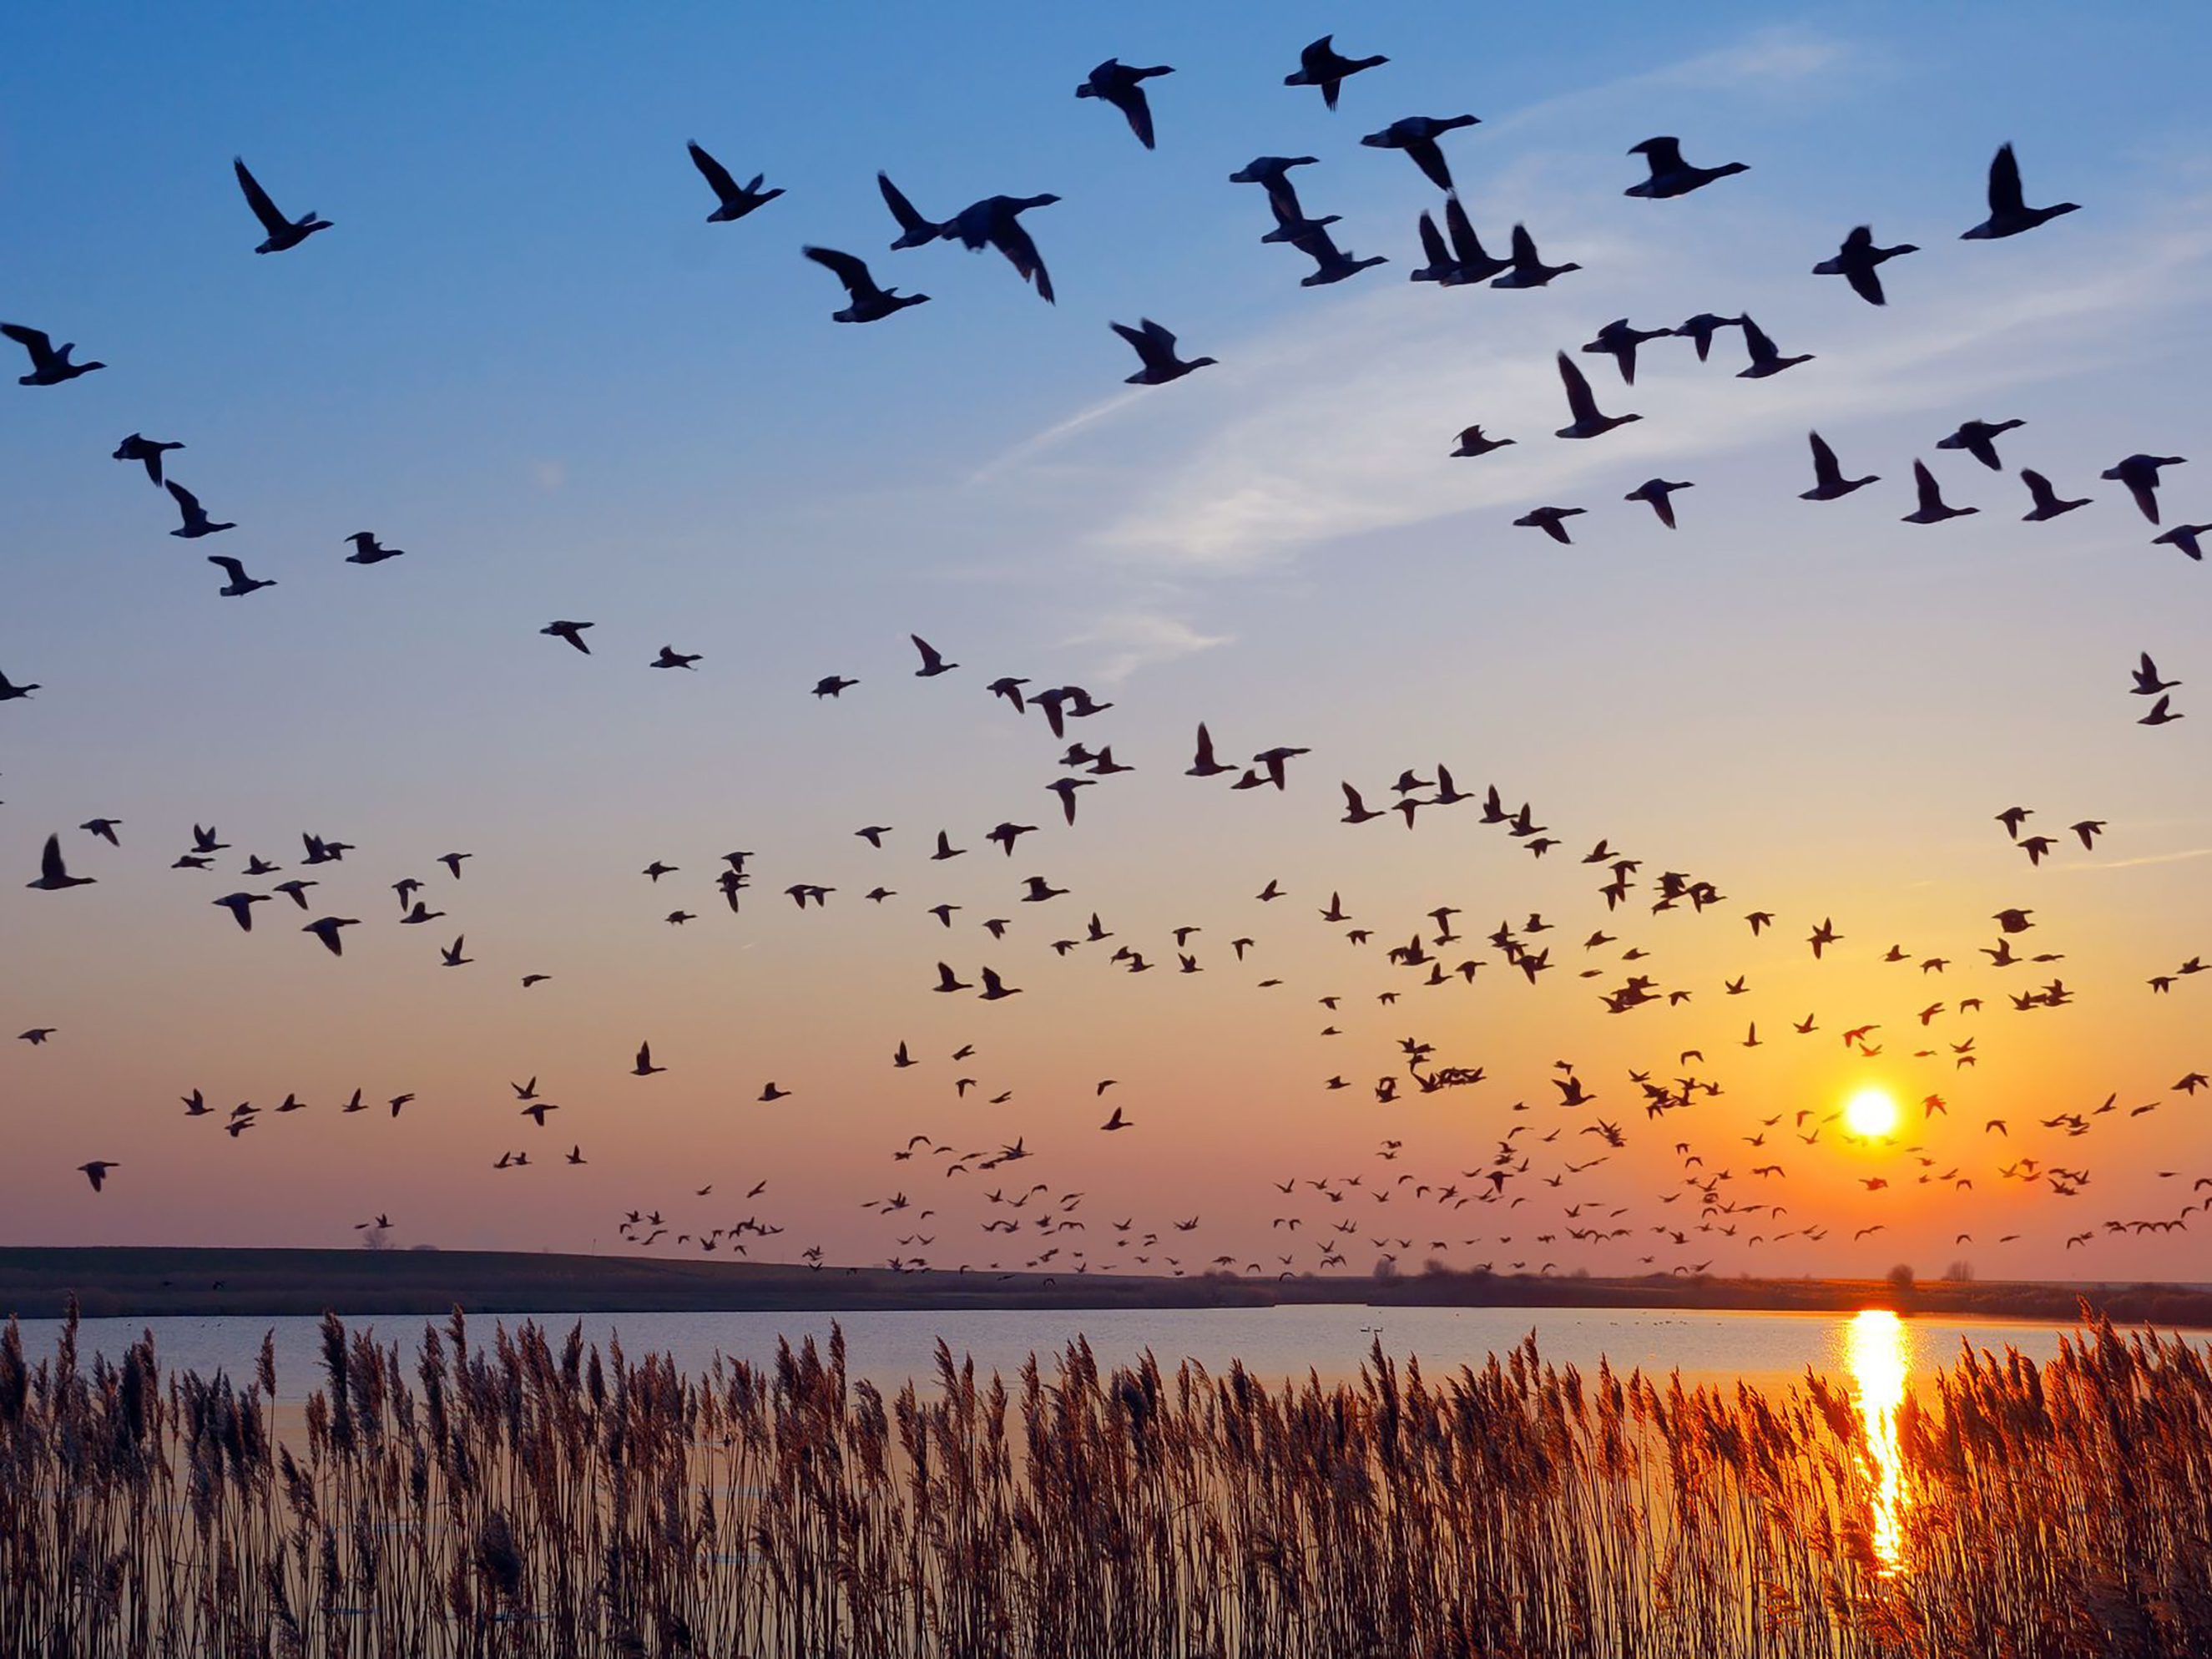 Ducks flying over water at sunset